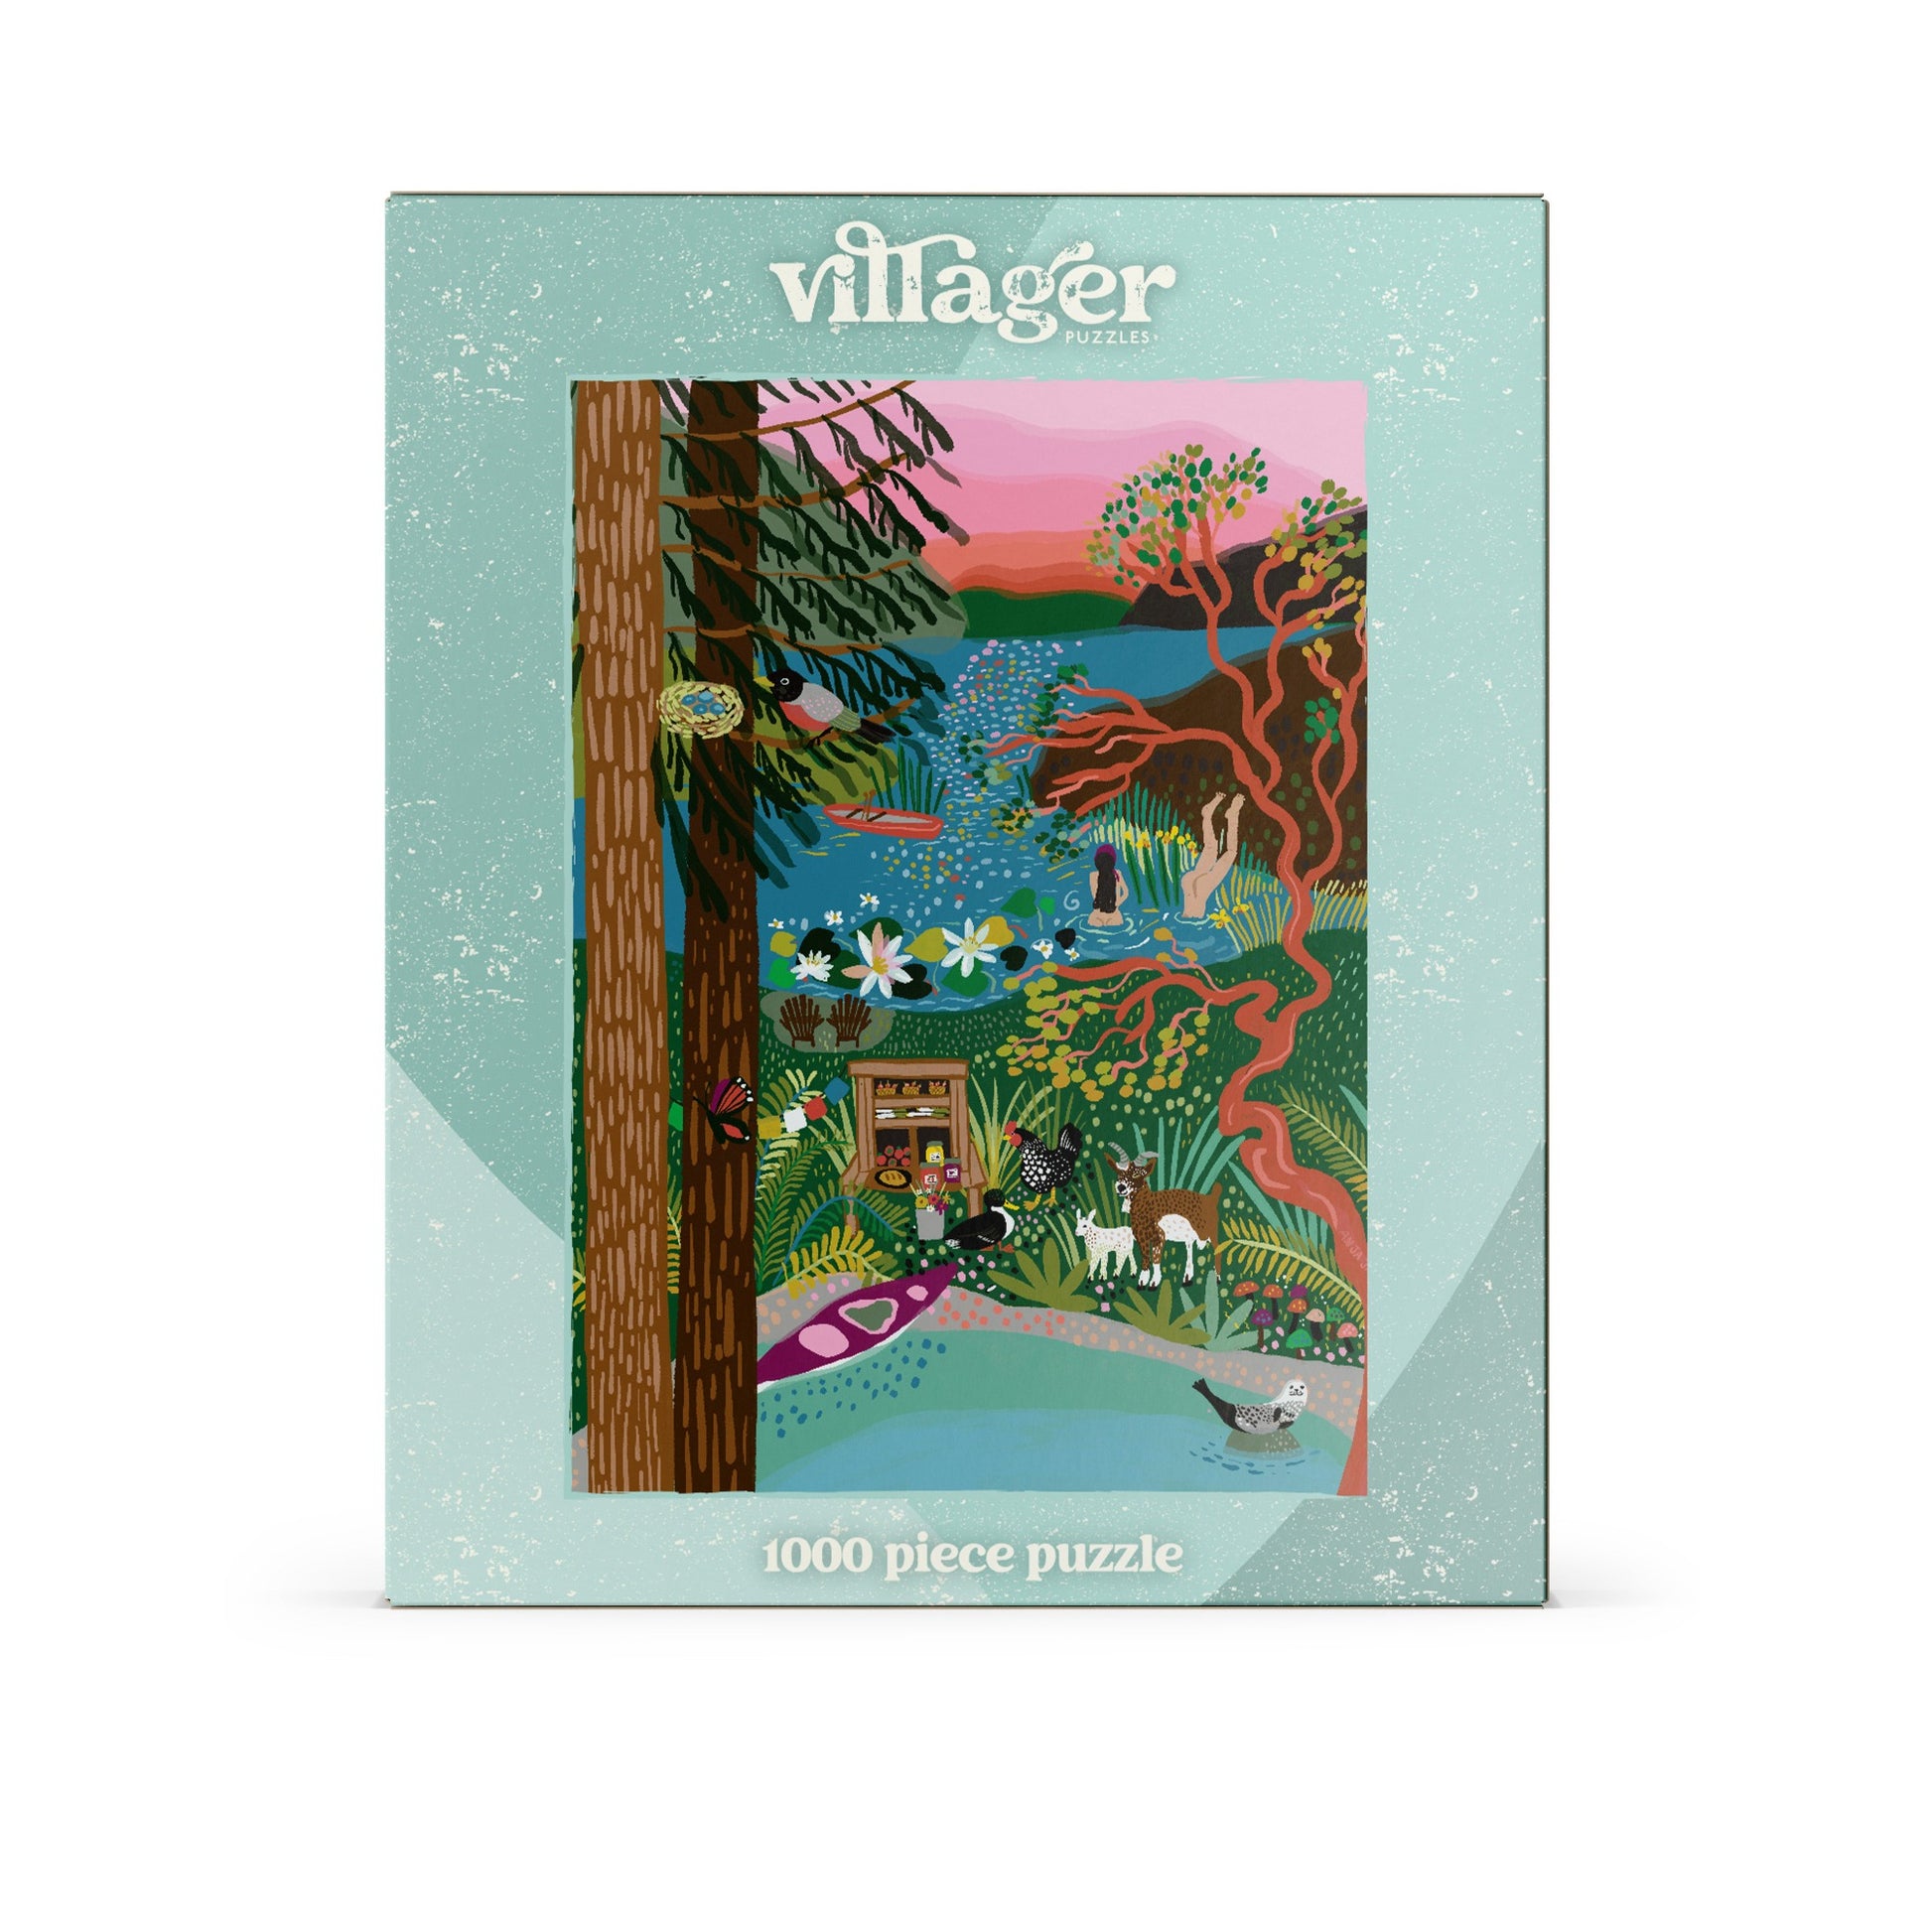 Front box image of Villager Puzzle | 1000-piece Salt Spring Island Swim jigsaw puzzle designed by Anja Jane